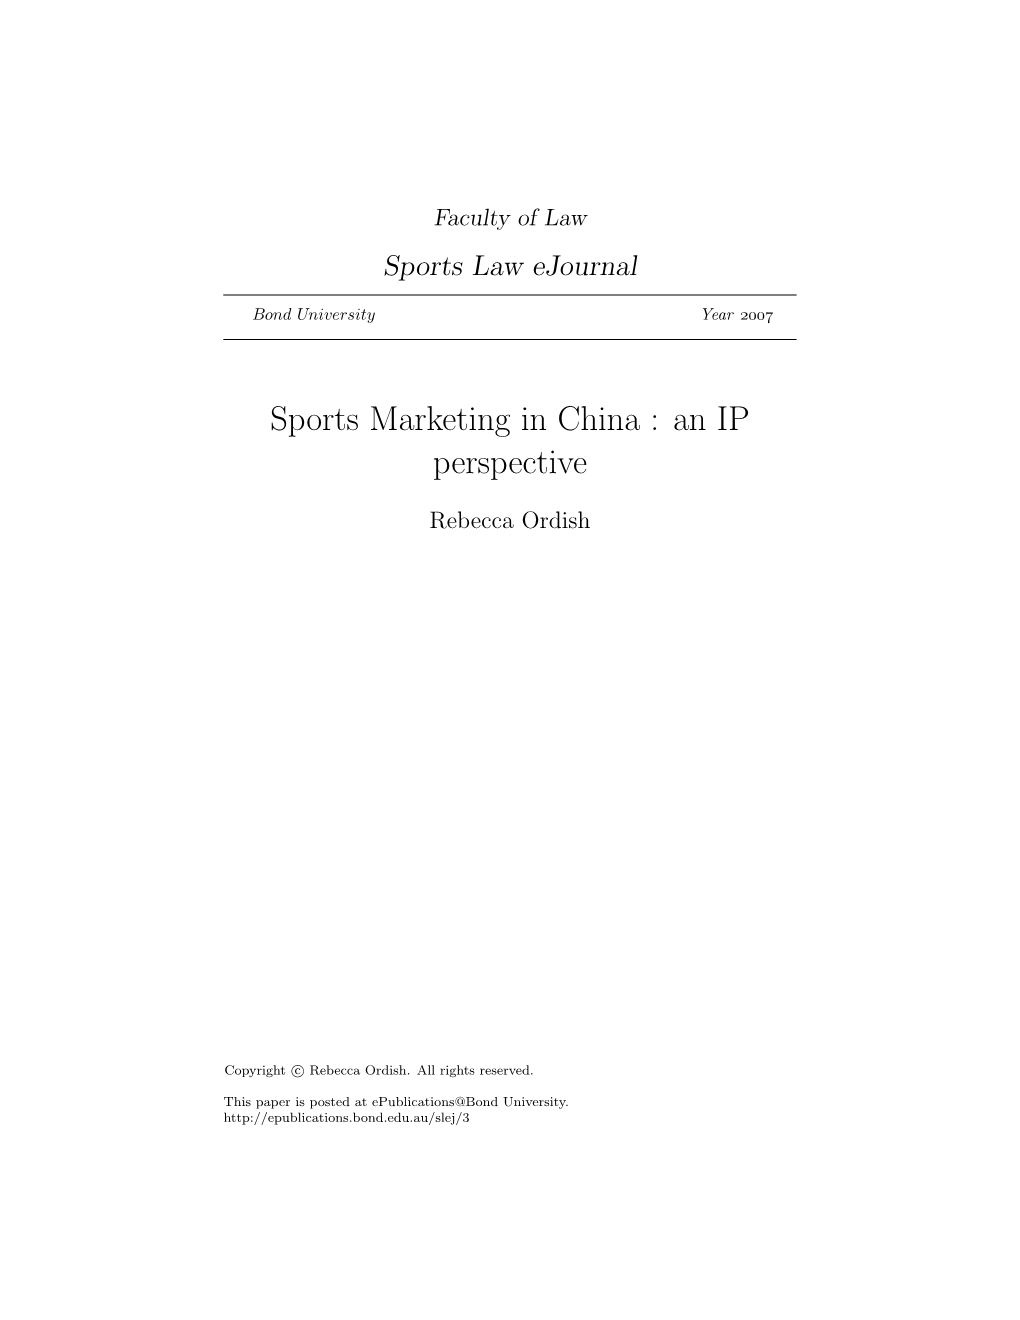 Sports Marketing in China : an IP Perspective